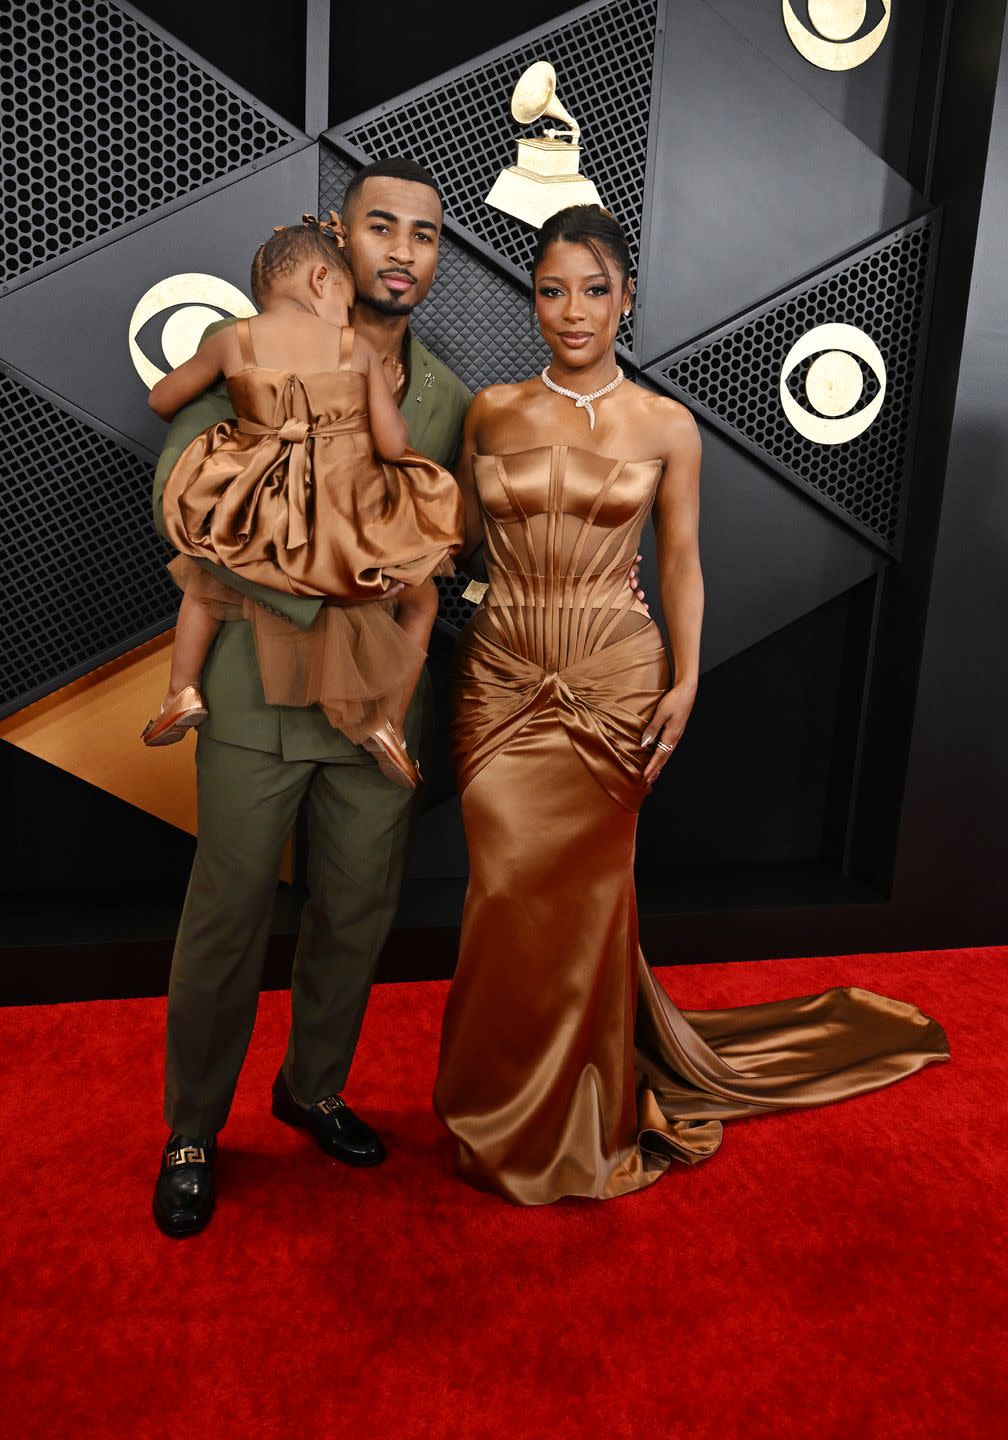 john gaines, hazel monet and victoria monet at the 66th annual grammy awards held at cryptocom arena on february 4, 2024 in los angeles, california photo by gilbert floresbillboard via getty images